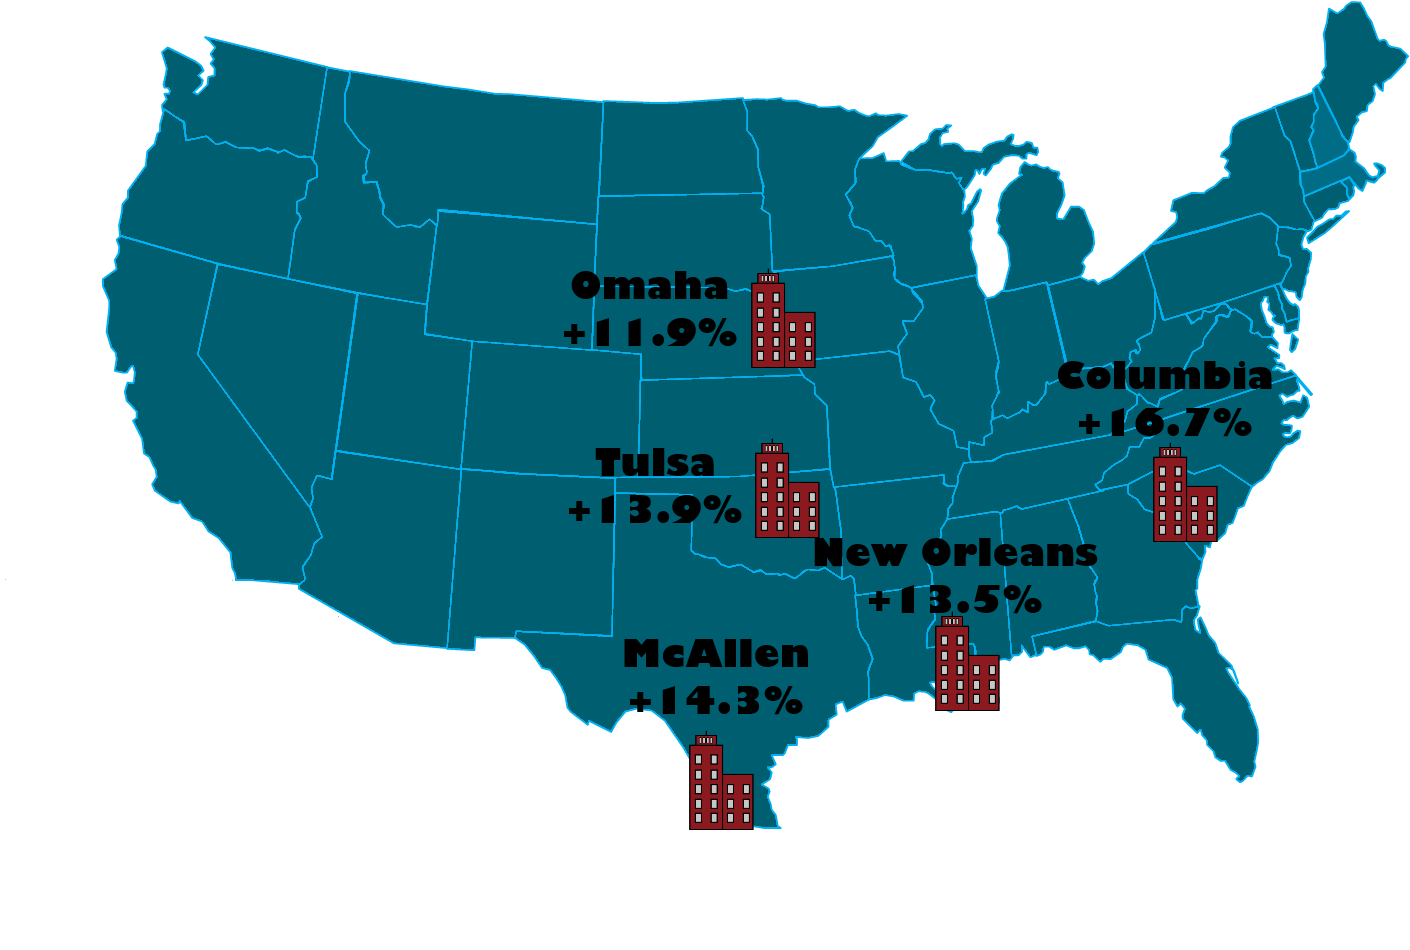 Top 5 cities in SEO job growth by percentage: Omaha, Tulsa, New Orleans, Columbia (SC), McAllen